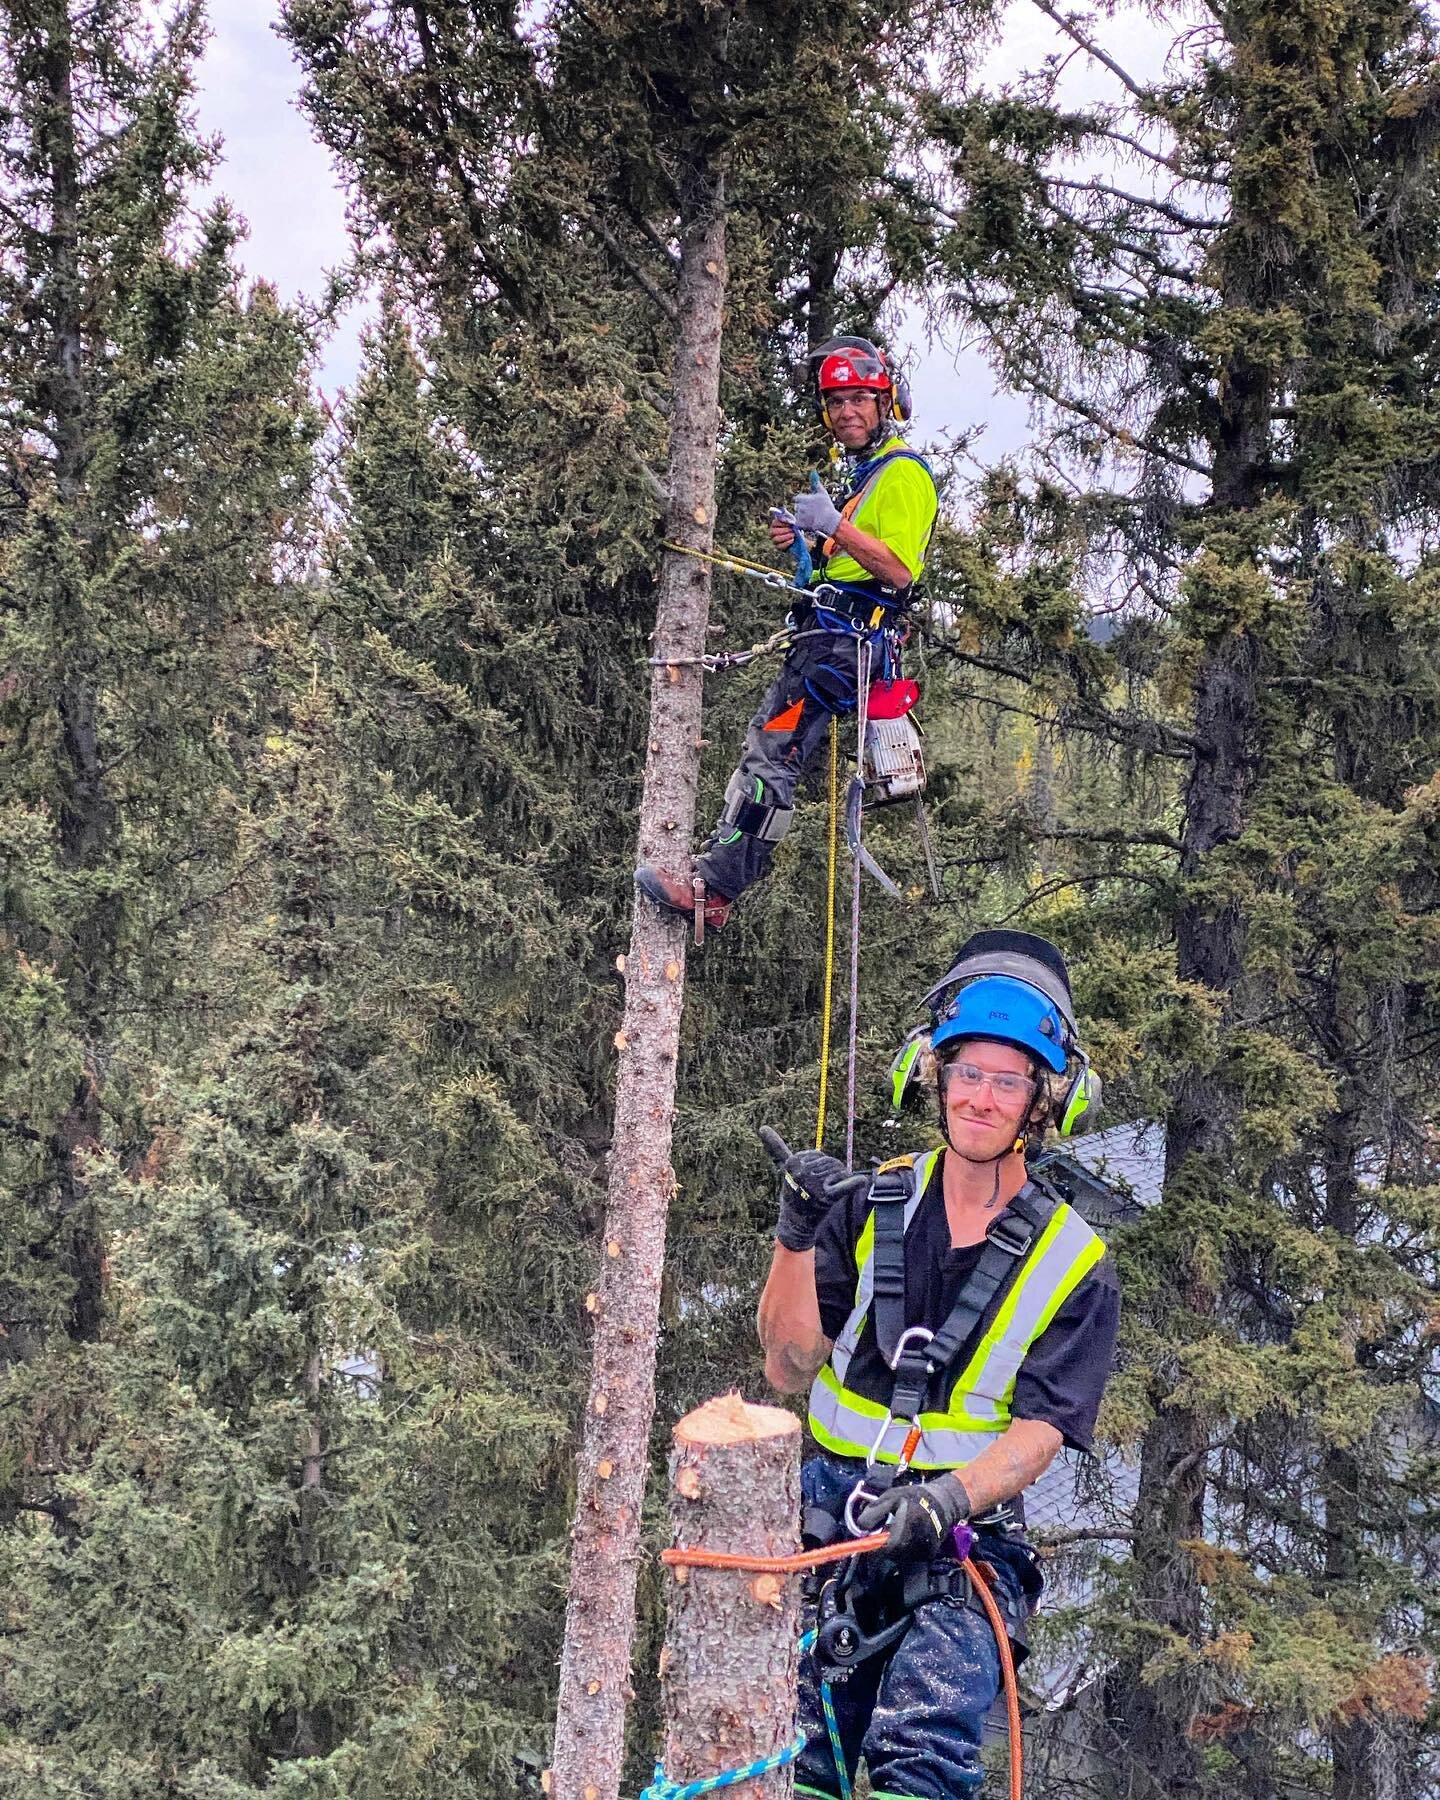 Red Mountain is growing for the 2022 season! We&rsquo;re welcoming new staff to our team in an effort to better structure ourselves to provide YOU with top quality, safe and efficient tree services at affordable prices! Our folks attend numerous rigo